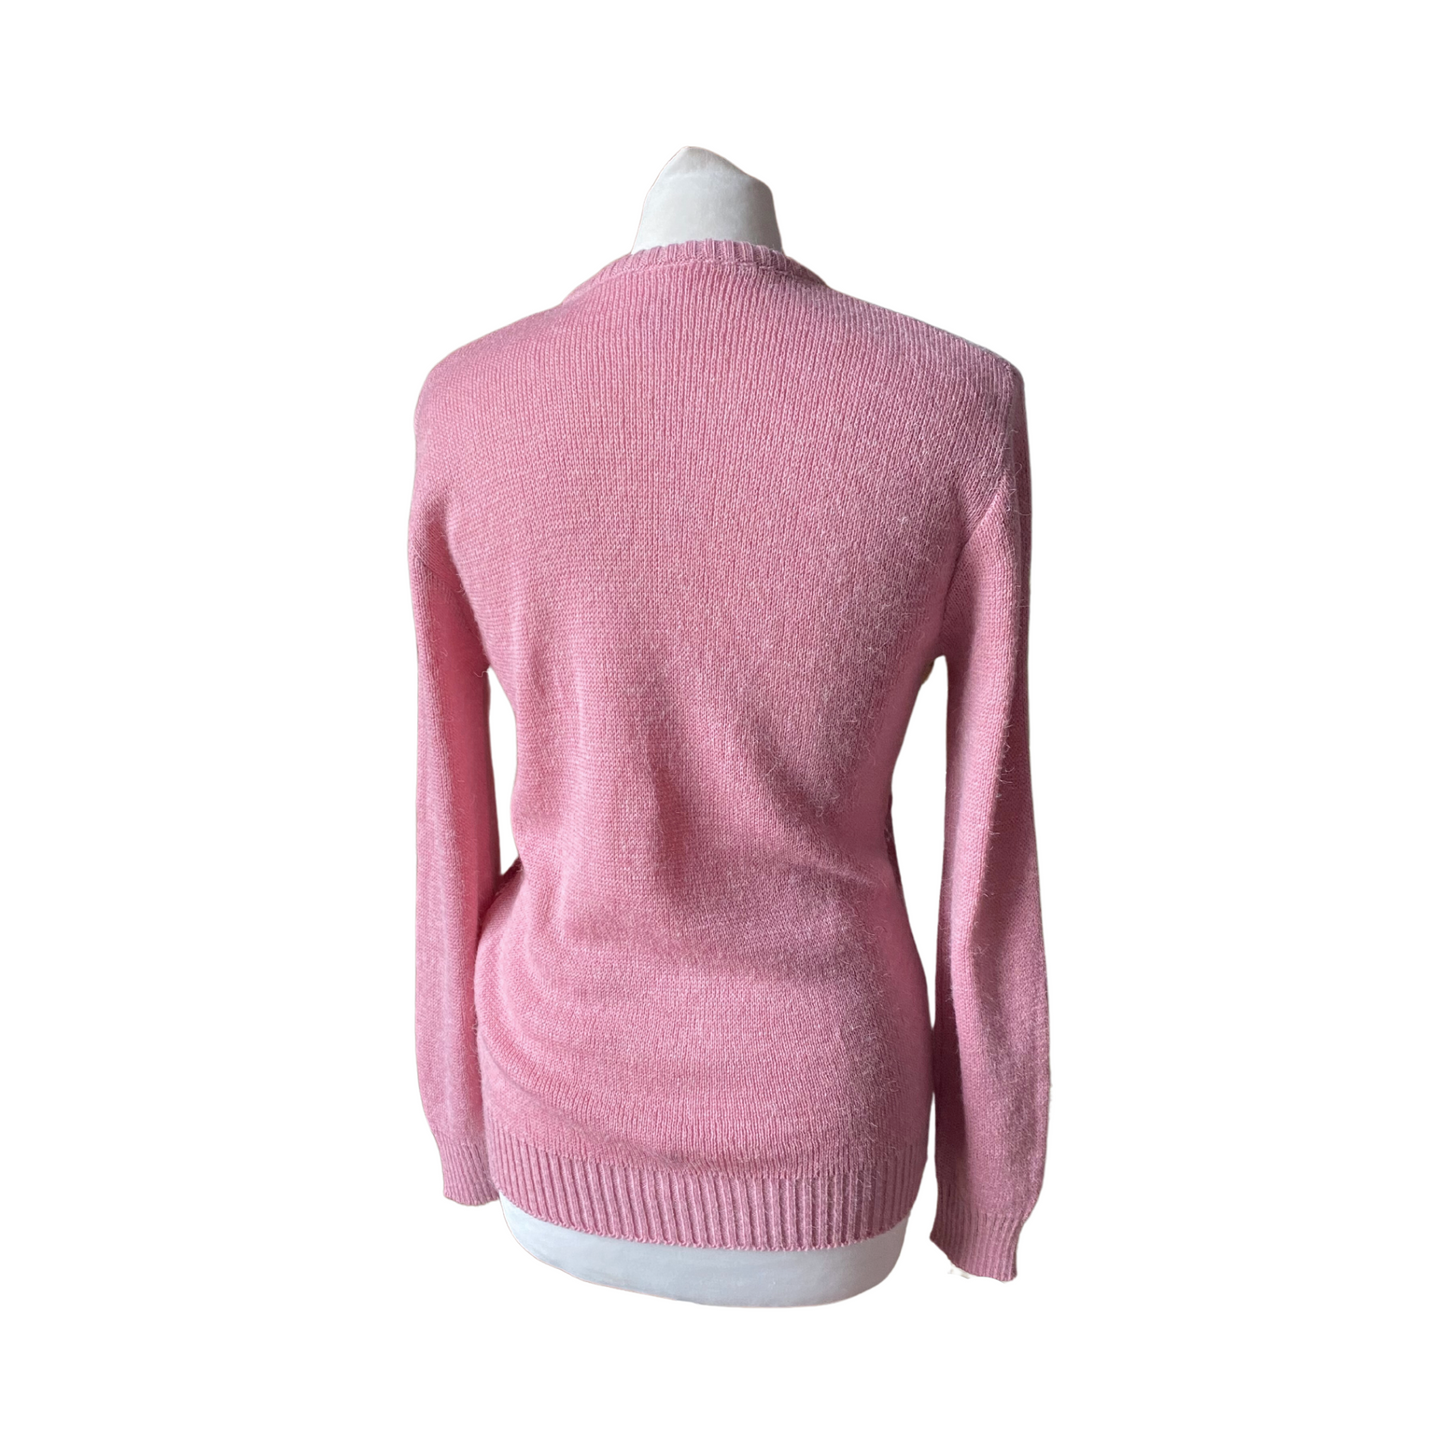 Fluffy long-sleeved jumper with pink and white argyle design